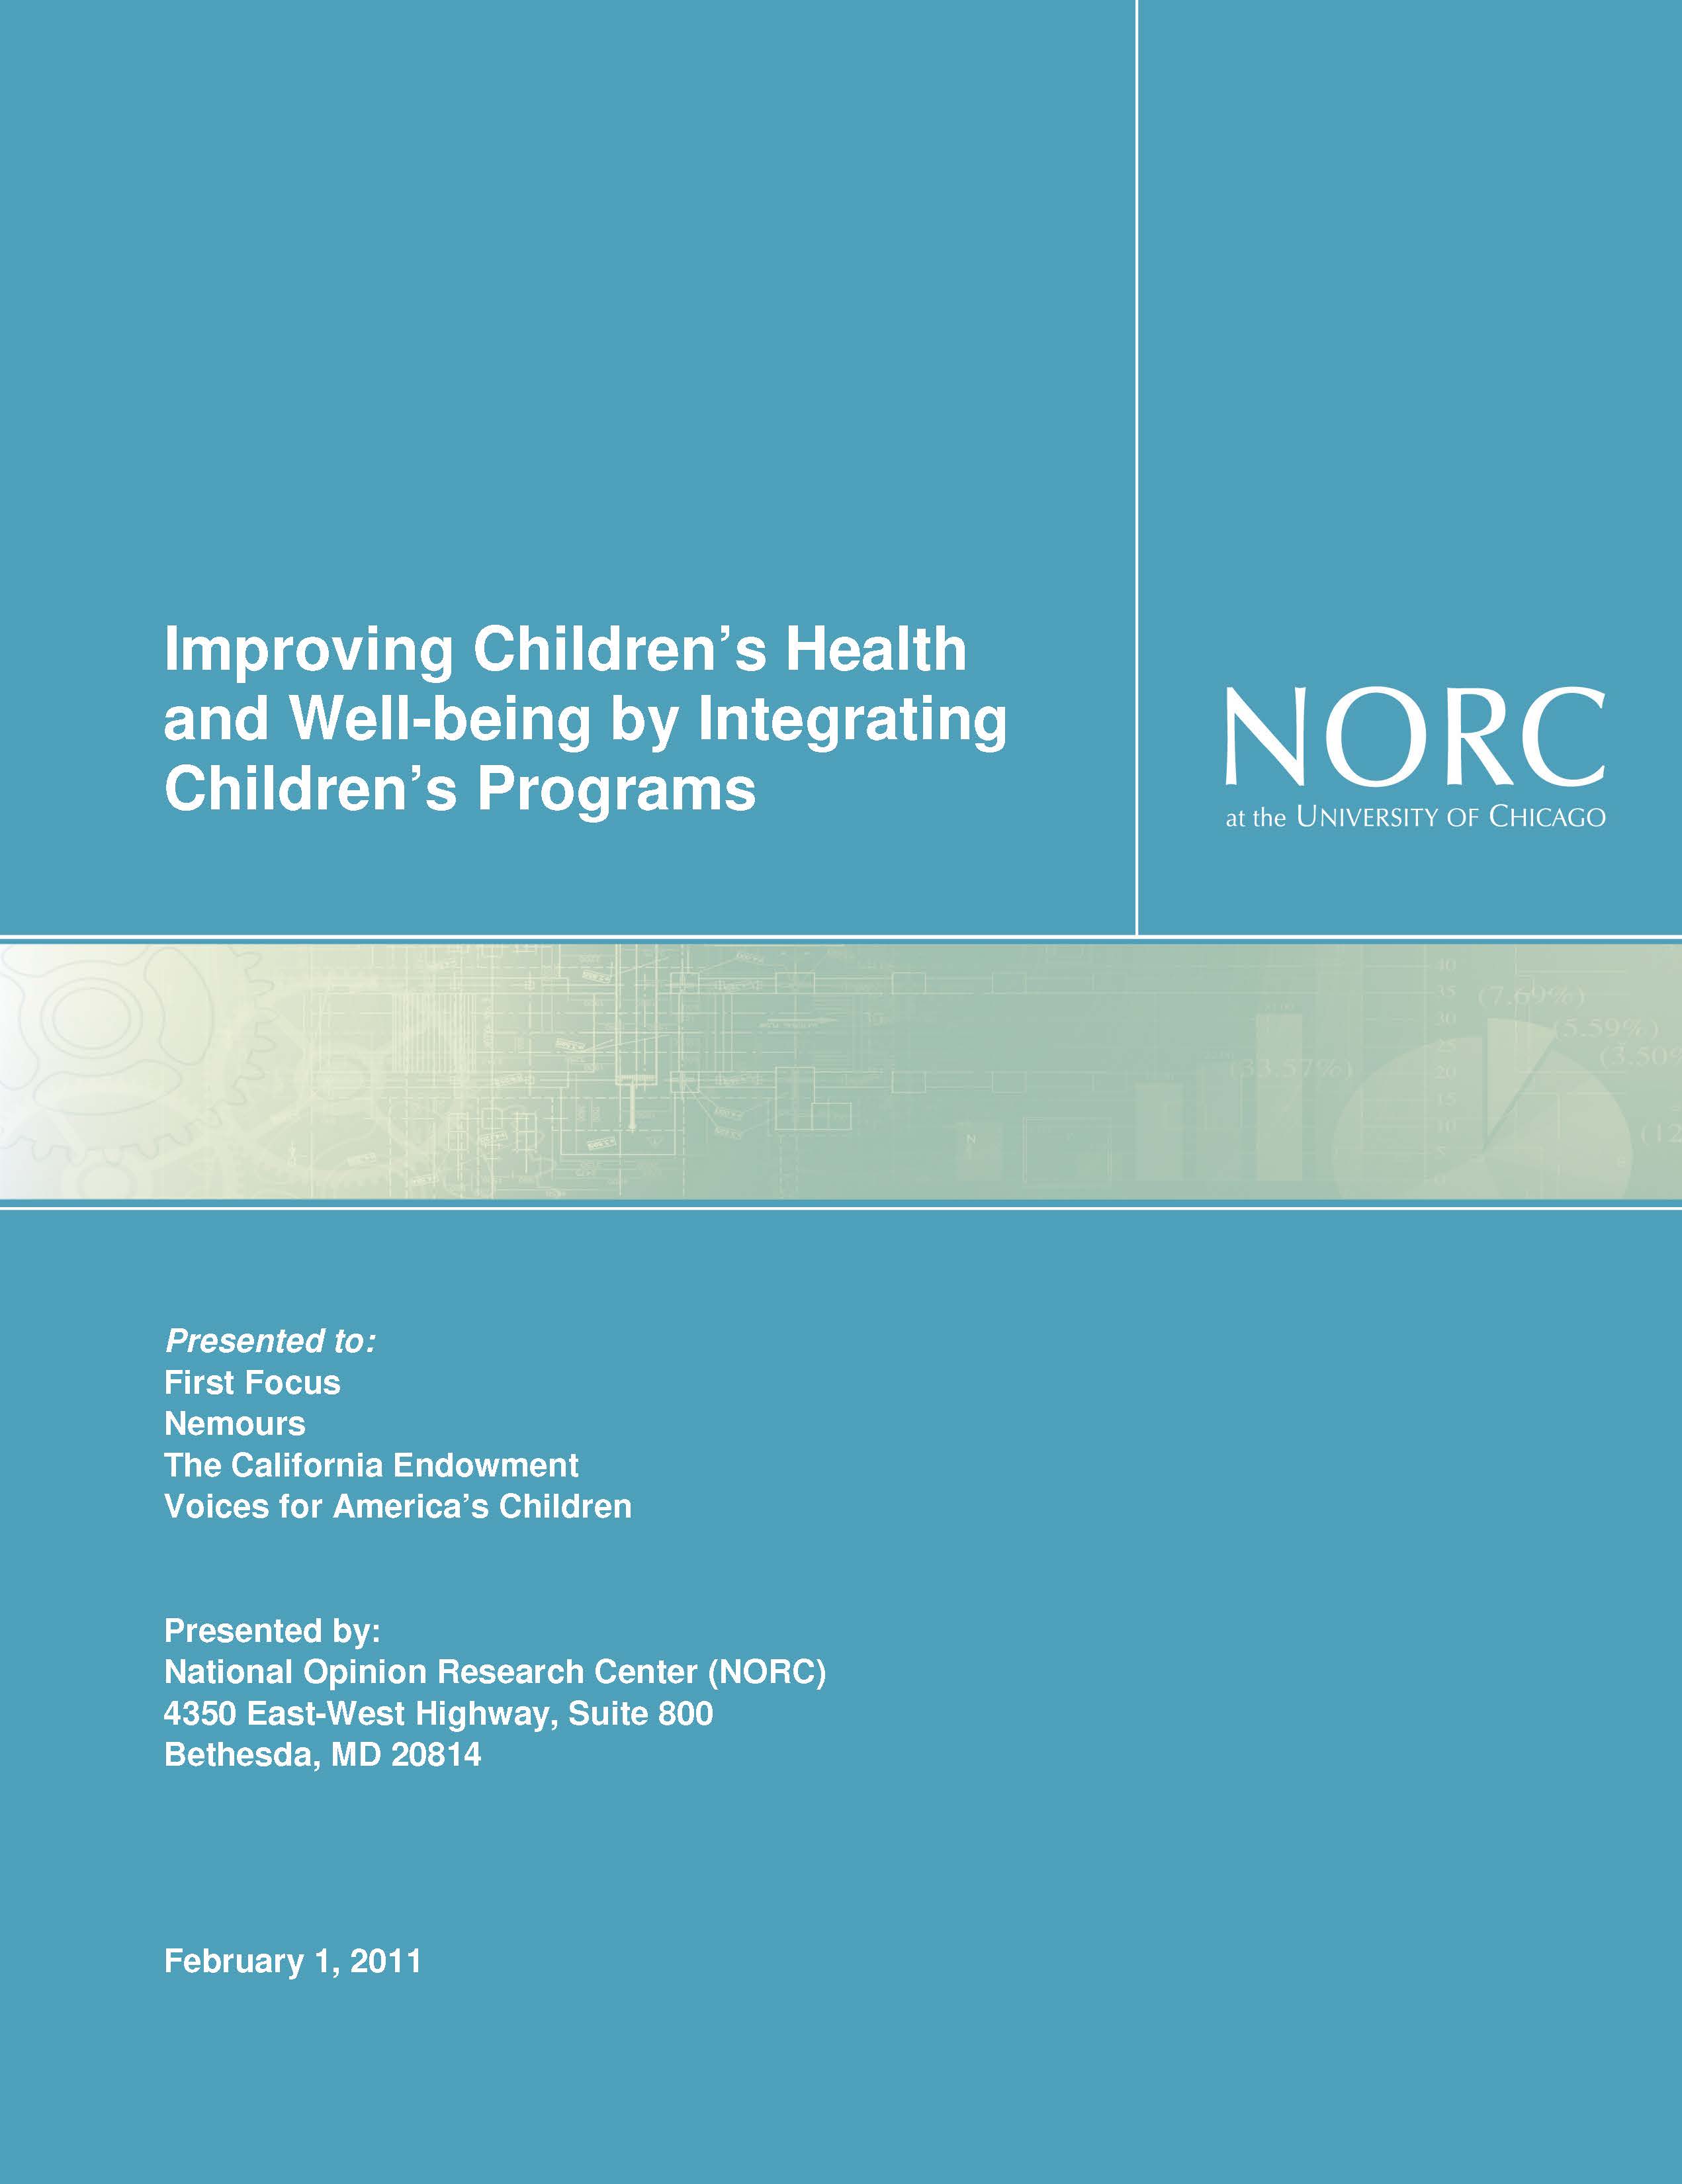 Improving Children’s Health and Well-being by Integrating Children’s Programs_Page_01